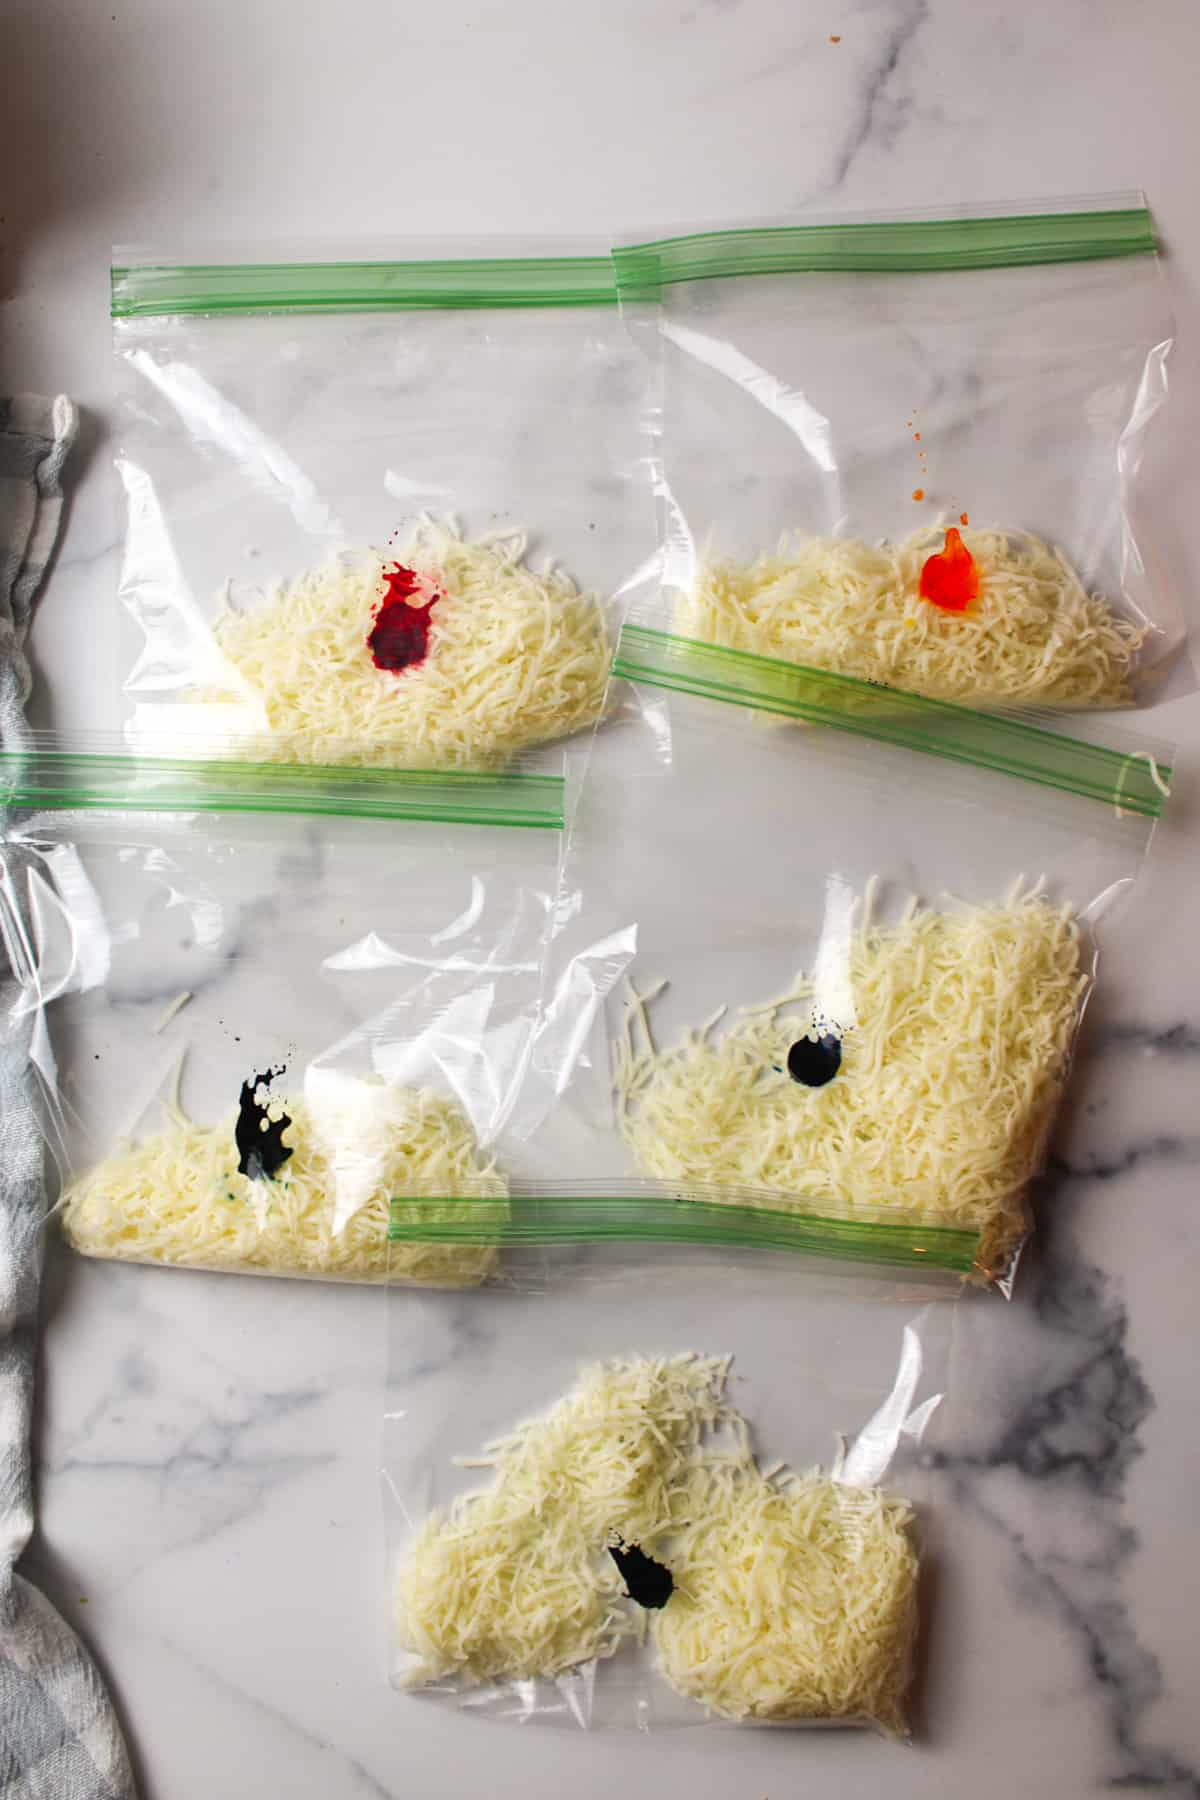 divided white shredded cheese in bags with dots of food coloring in each